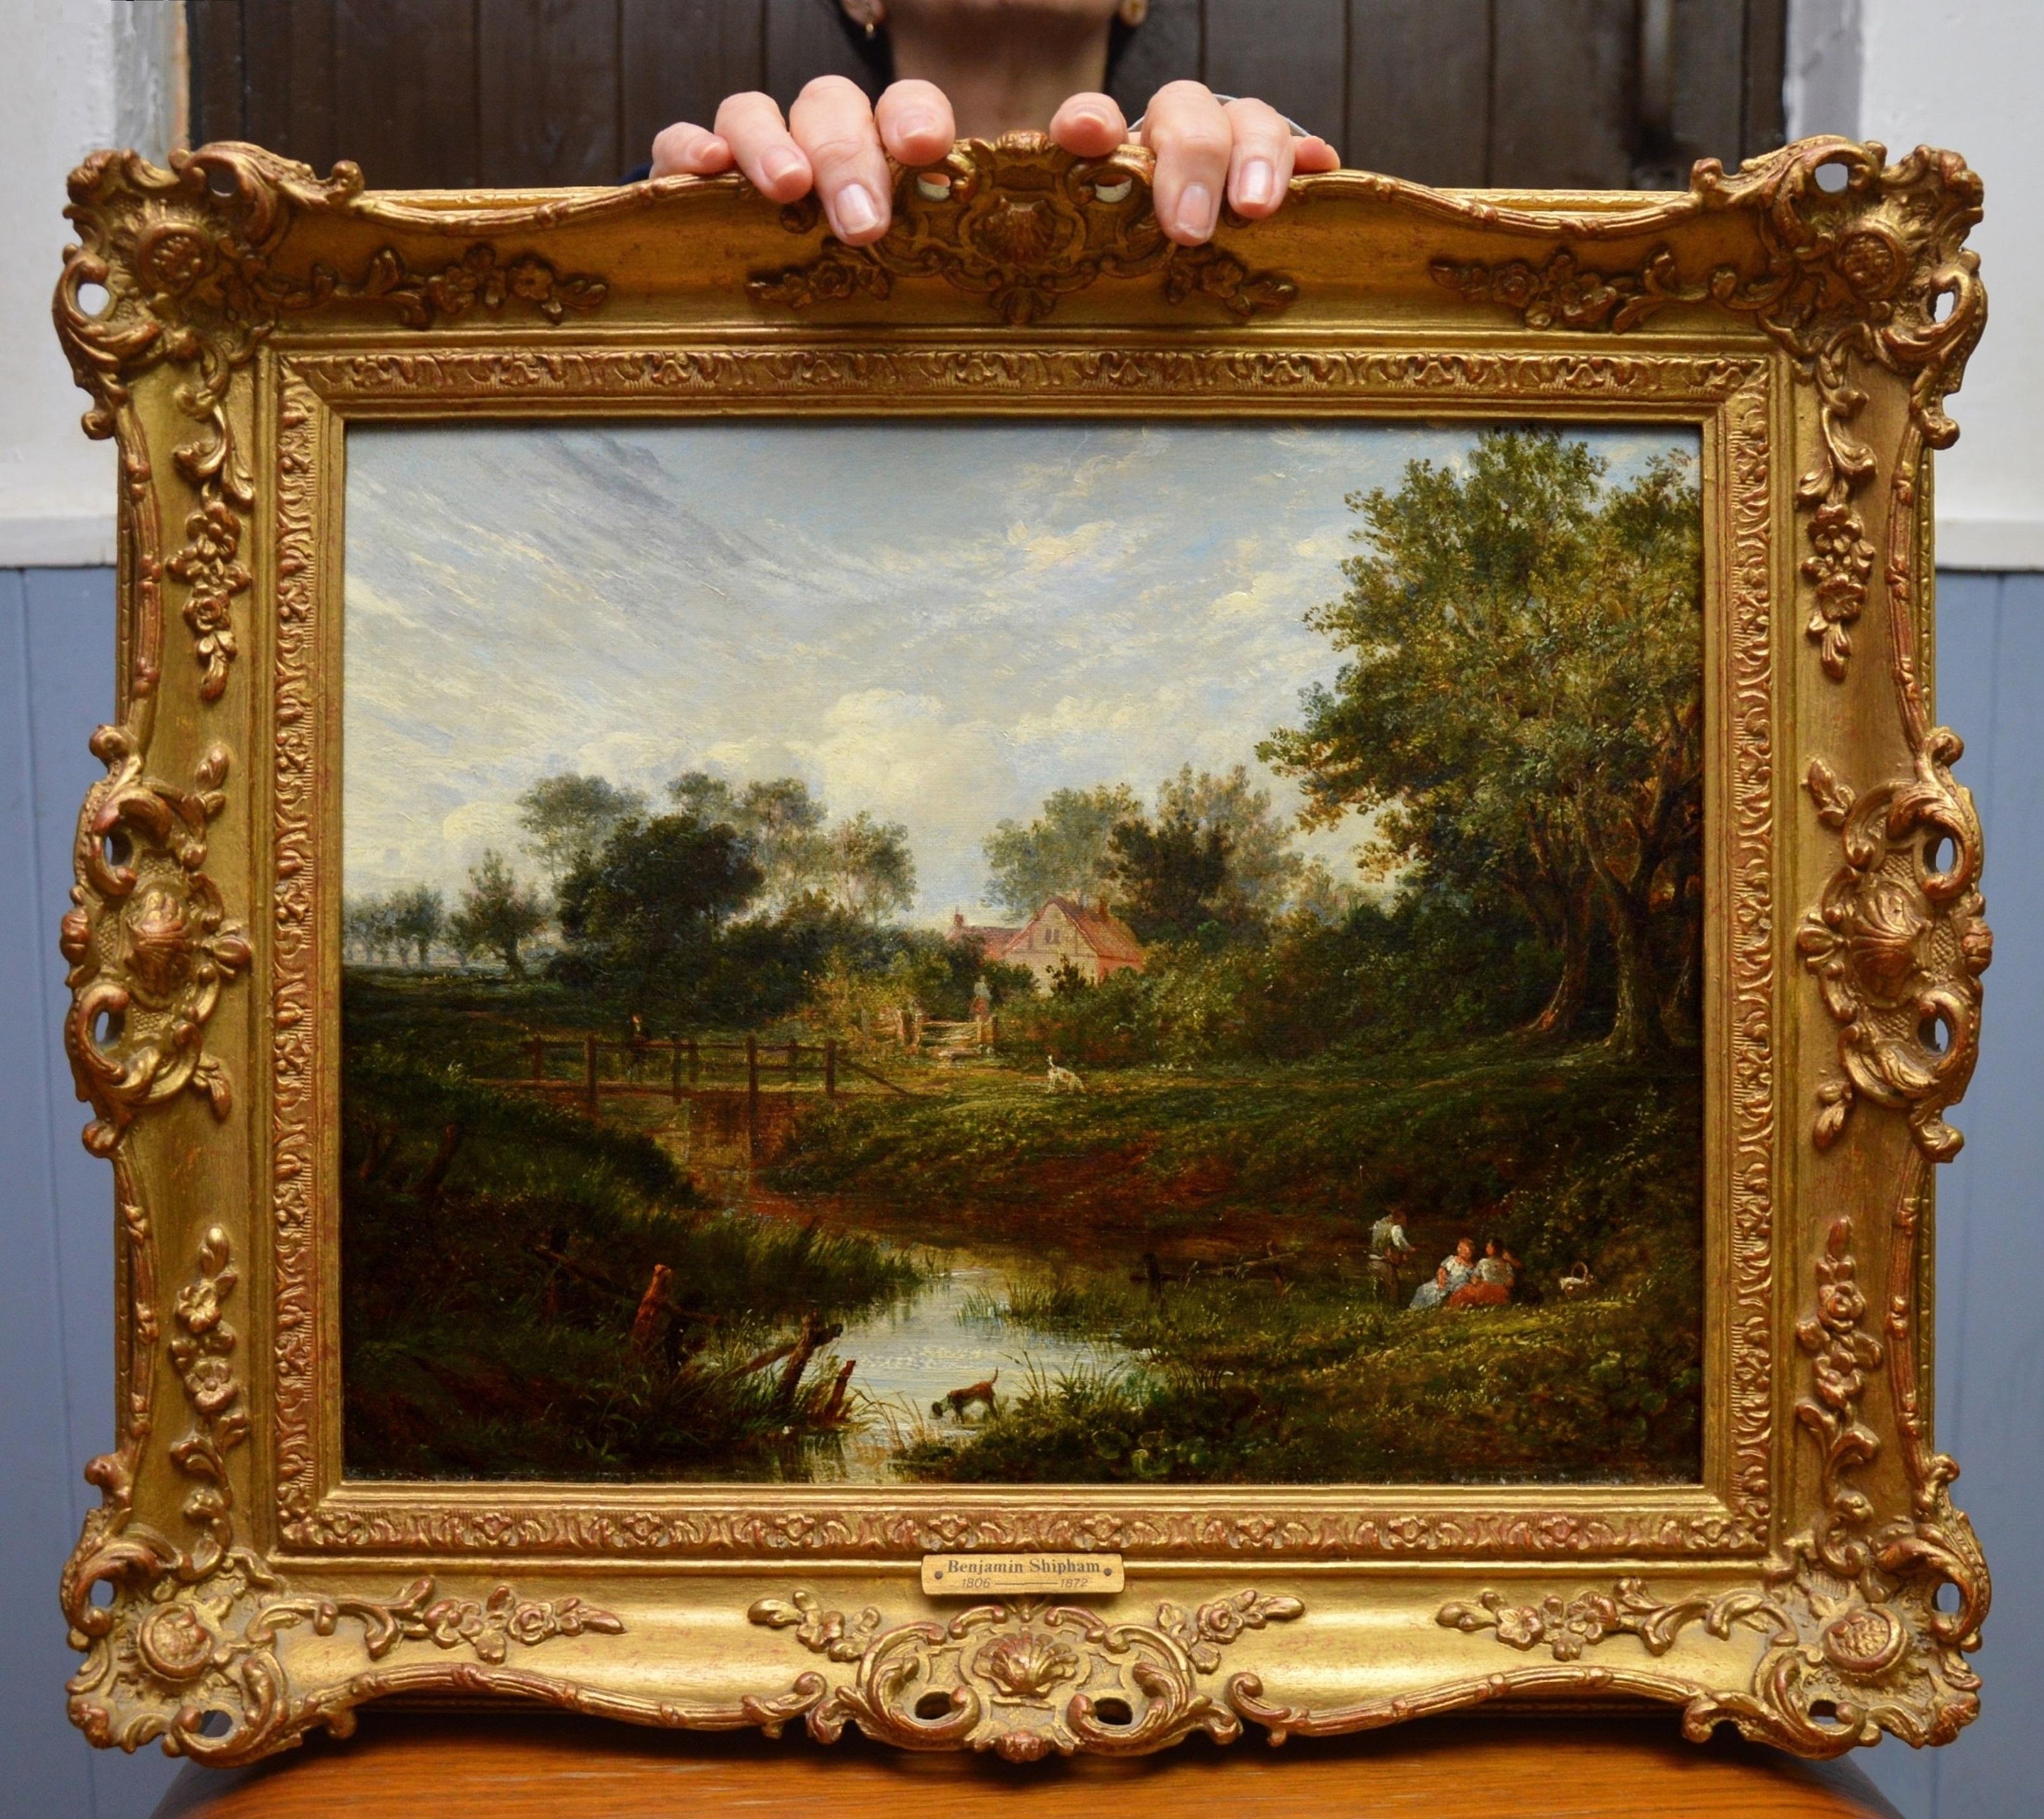 19th Century English Summer Landscape with Figures by a Stream - Painting by Benjamin Shipham